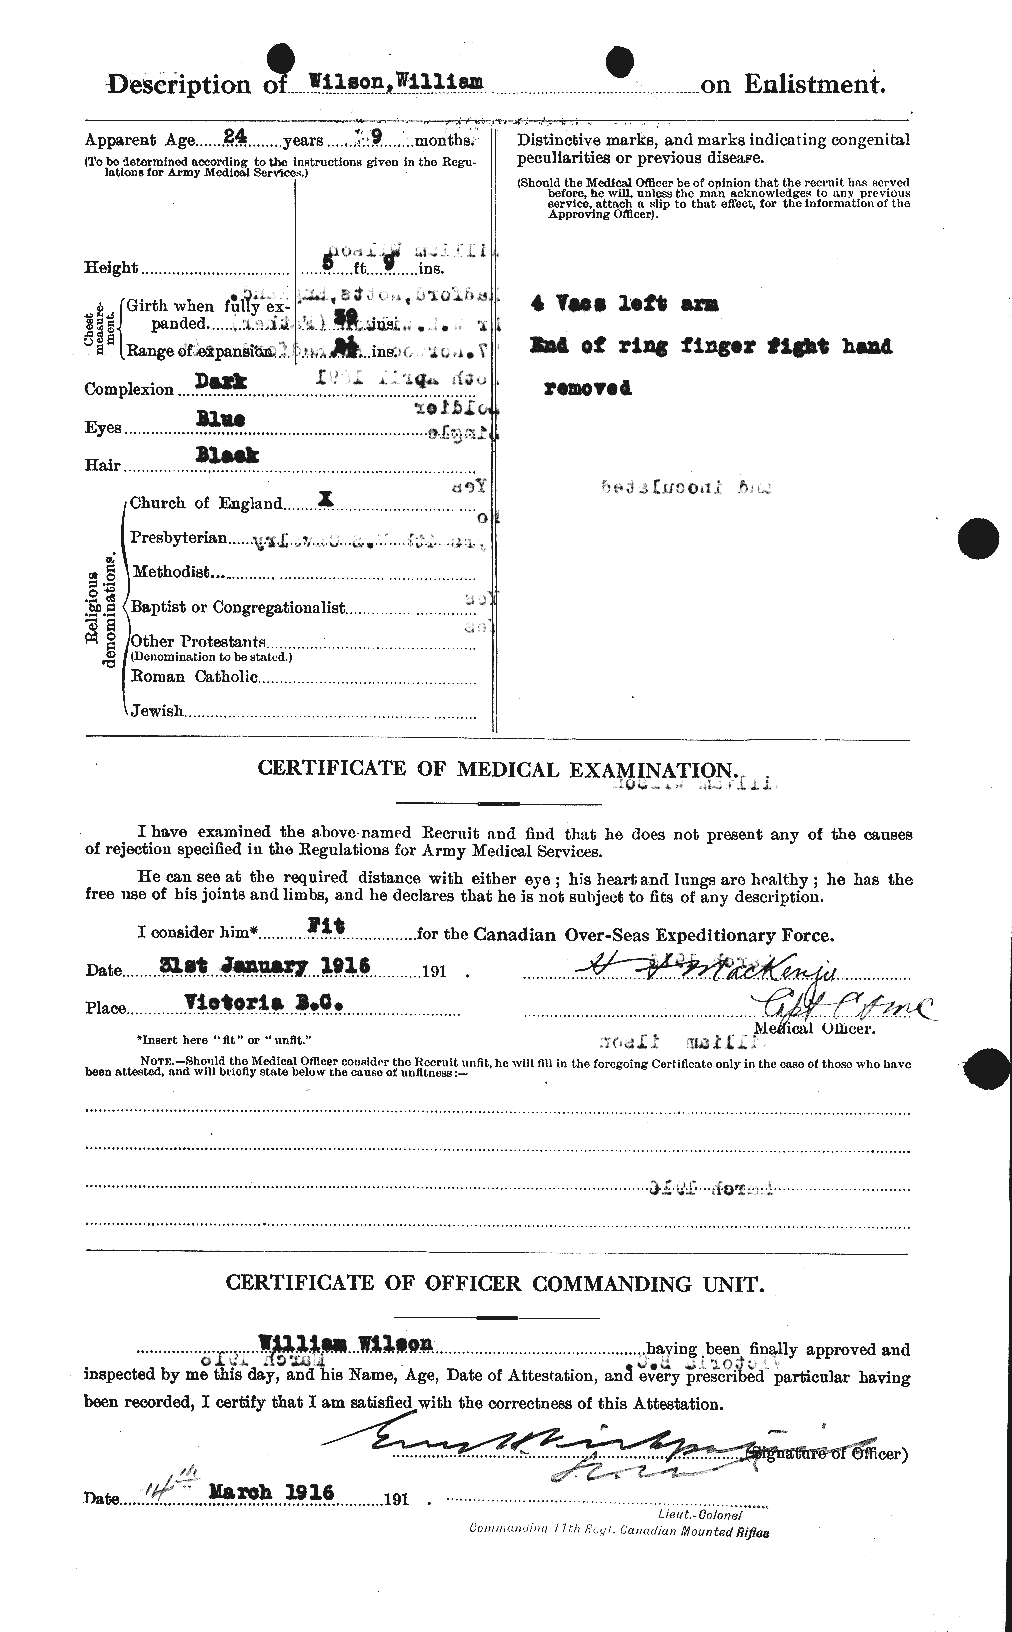 Personnel Records of the First World War - CEF 681868b